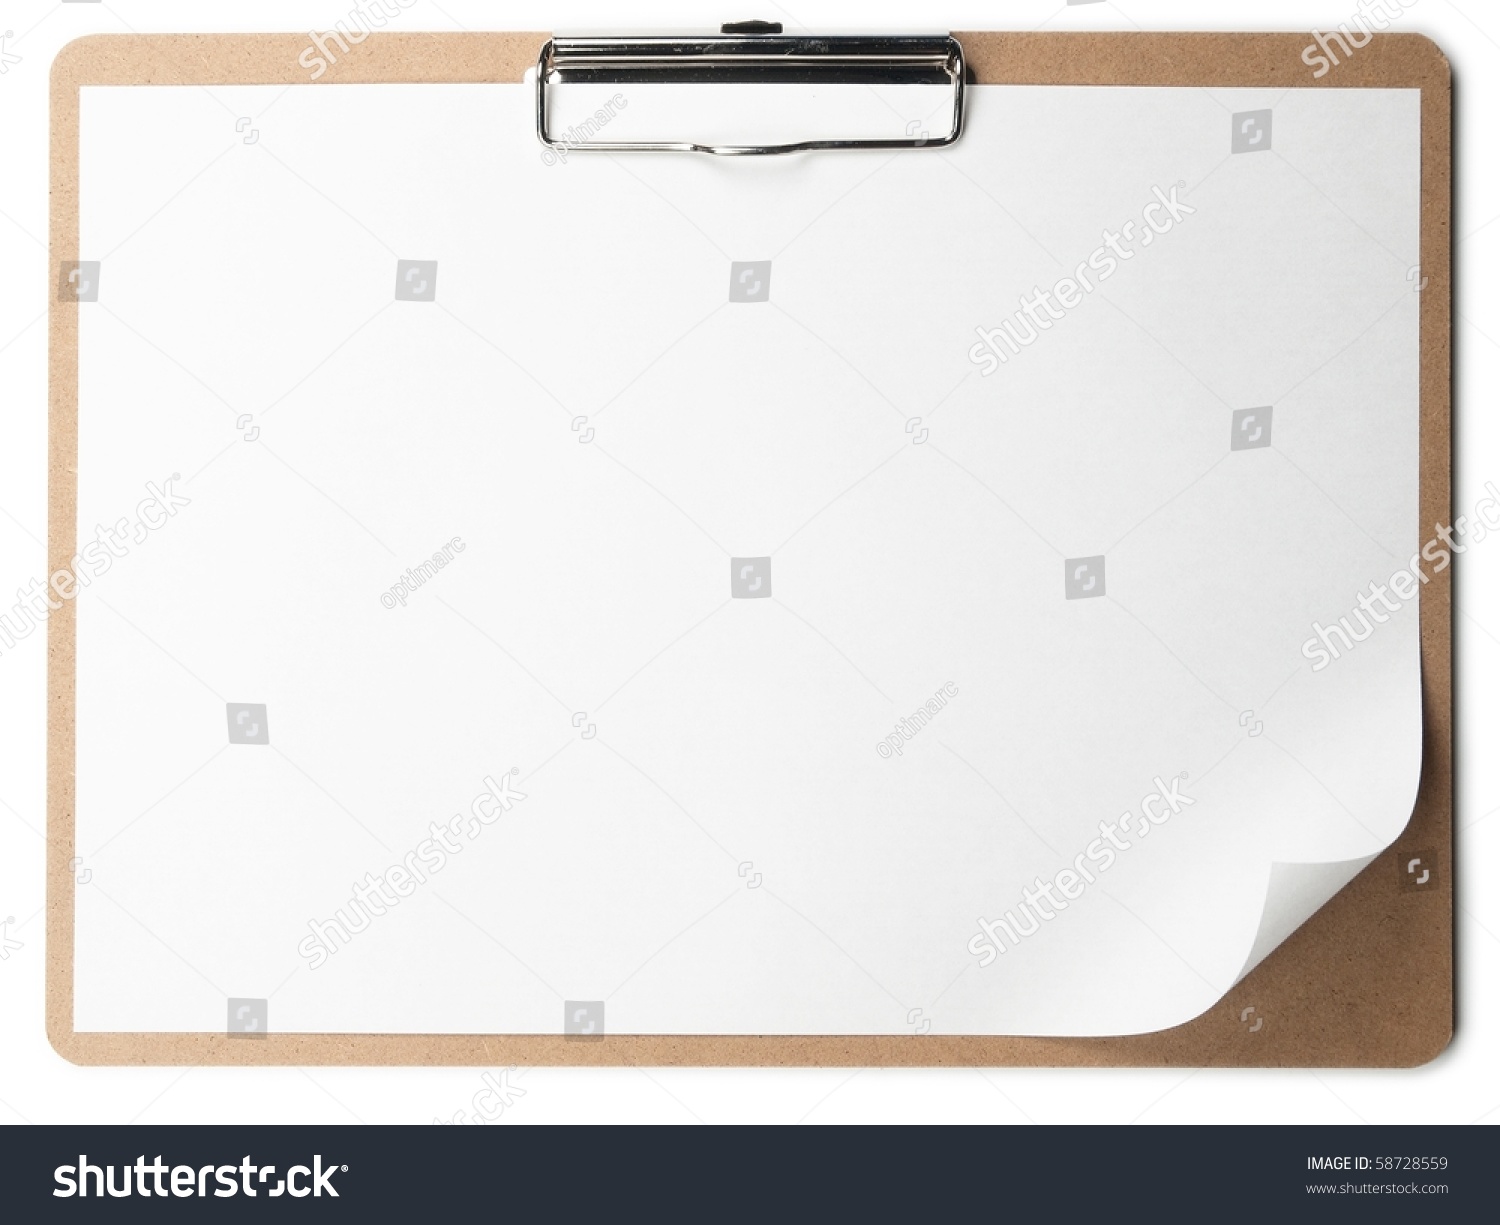 Horizontal clipboard with blank paper and curled corner. #58728559